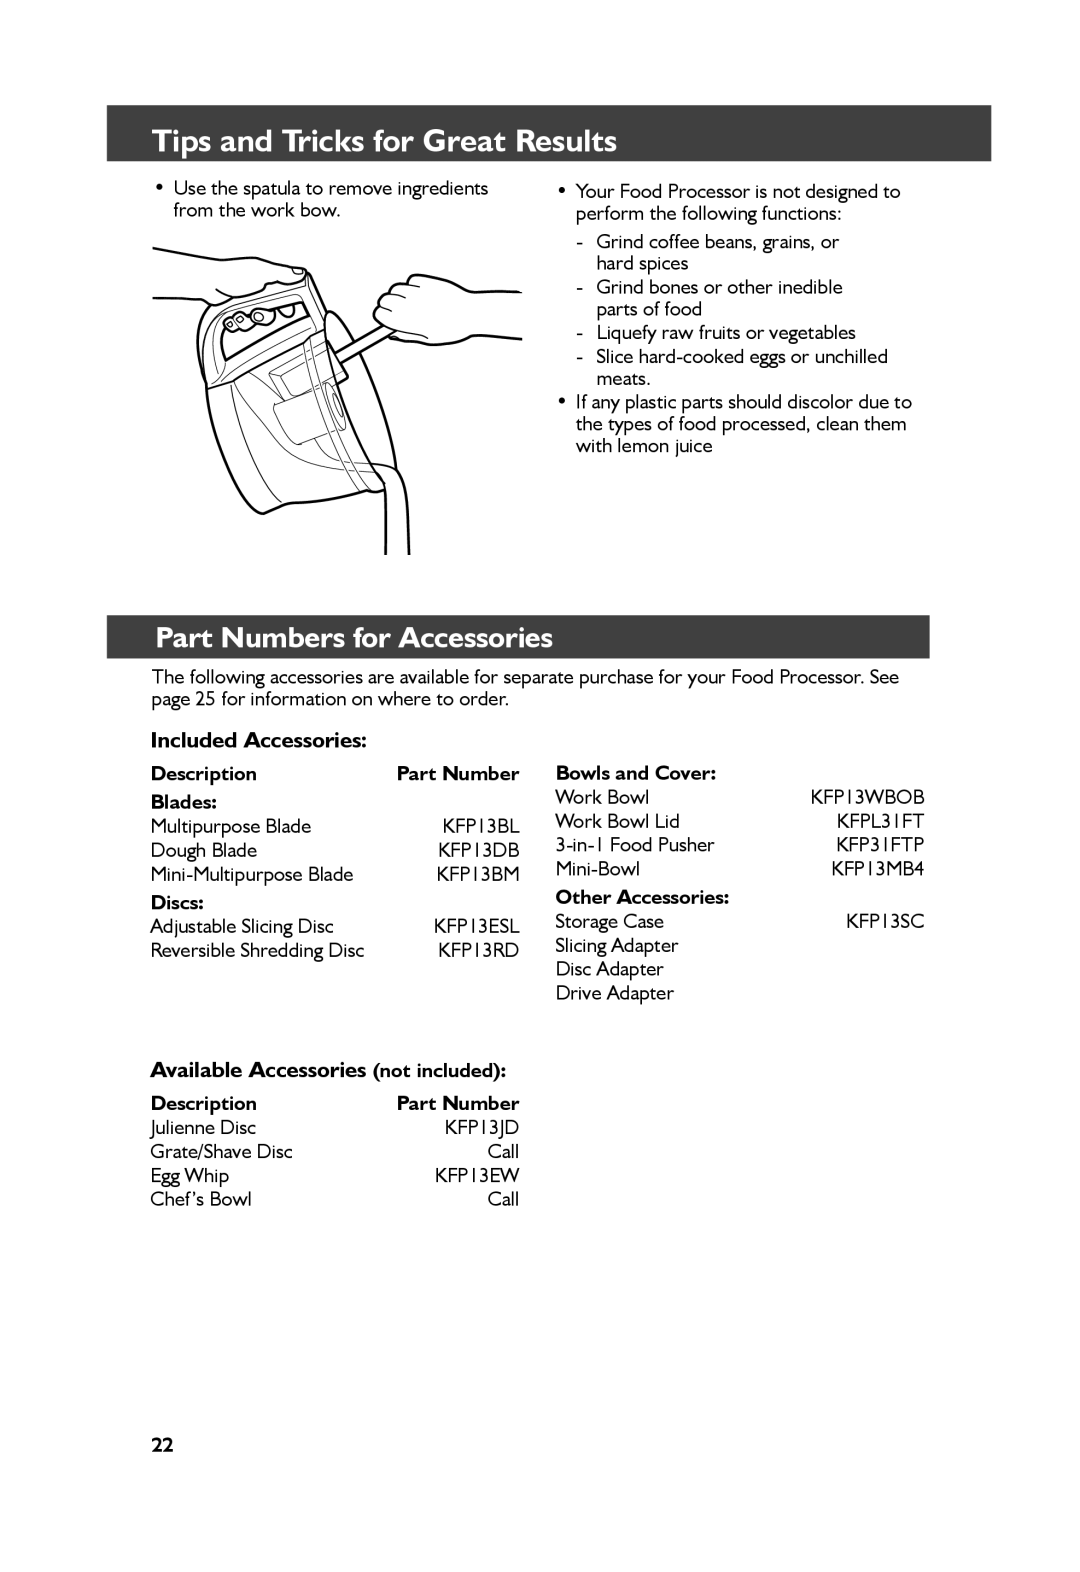 KitchenAid KFP1333 Tips and Tricks for Great Results, Part Numbers for Accessories, Included Accessories, Description 